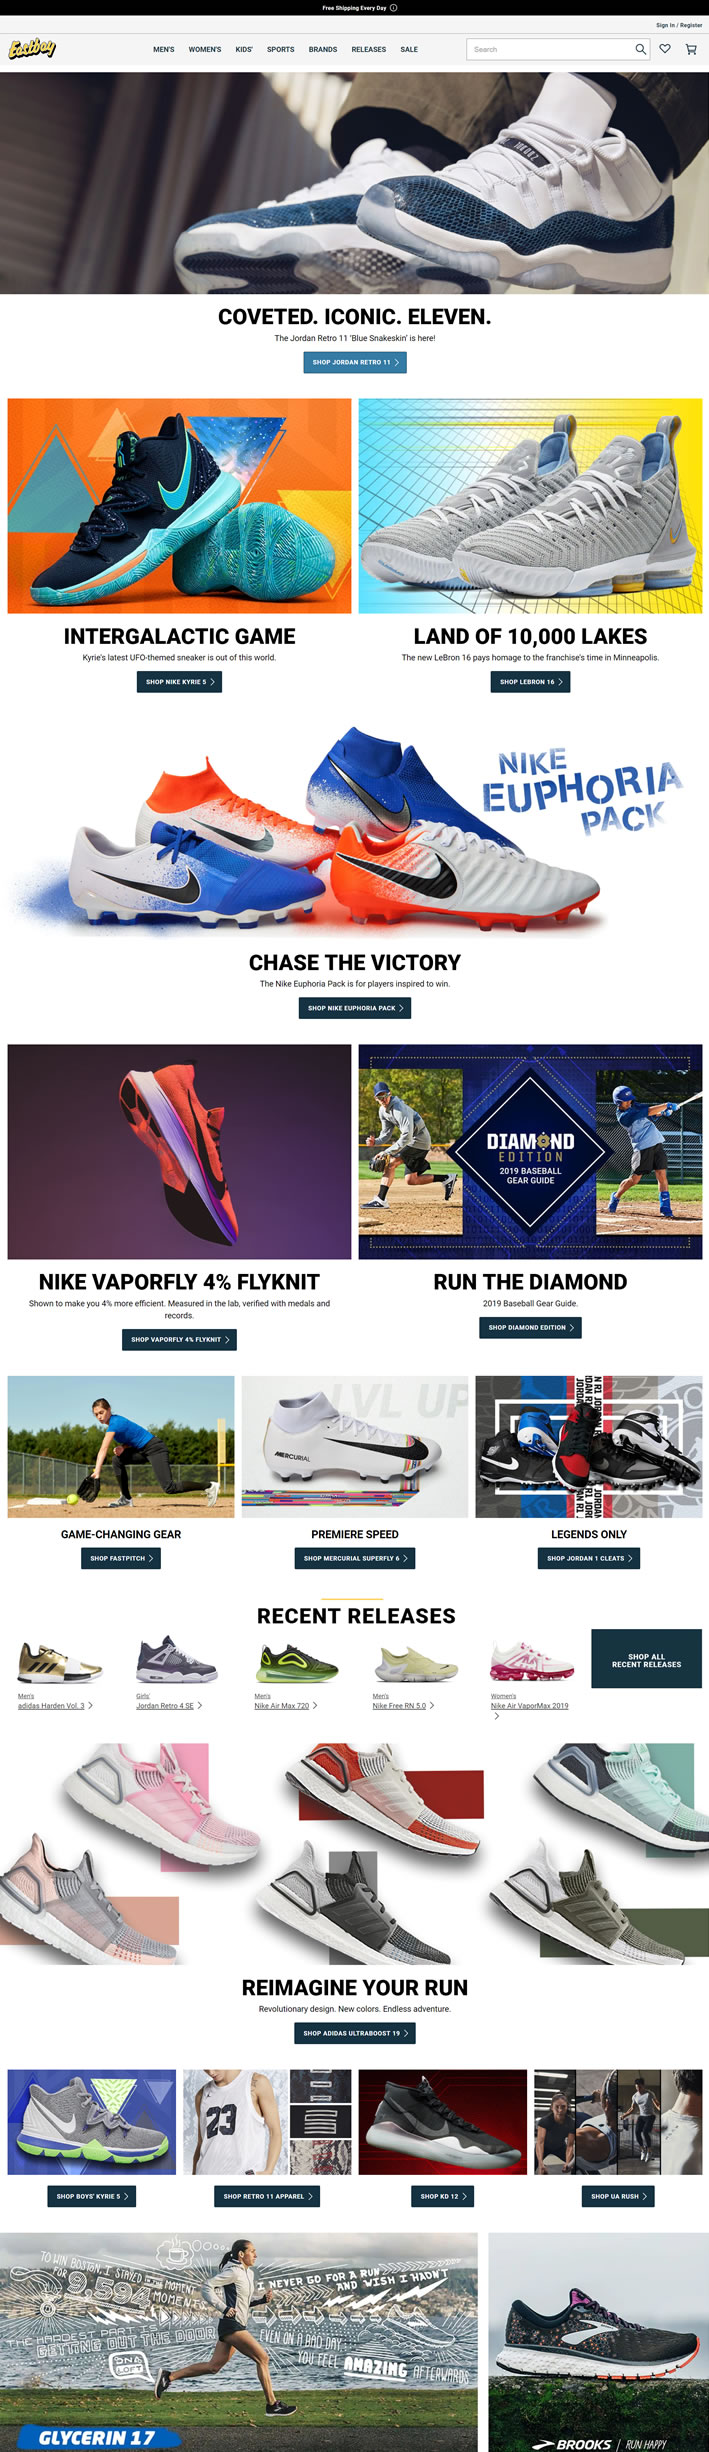 Athletic Shoes & Clothing: Eastbay